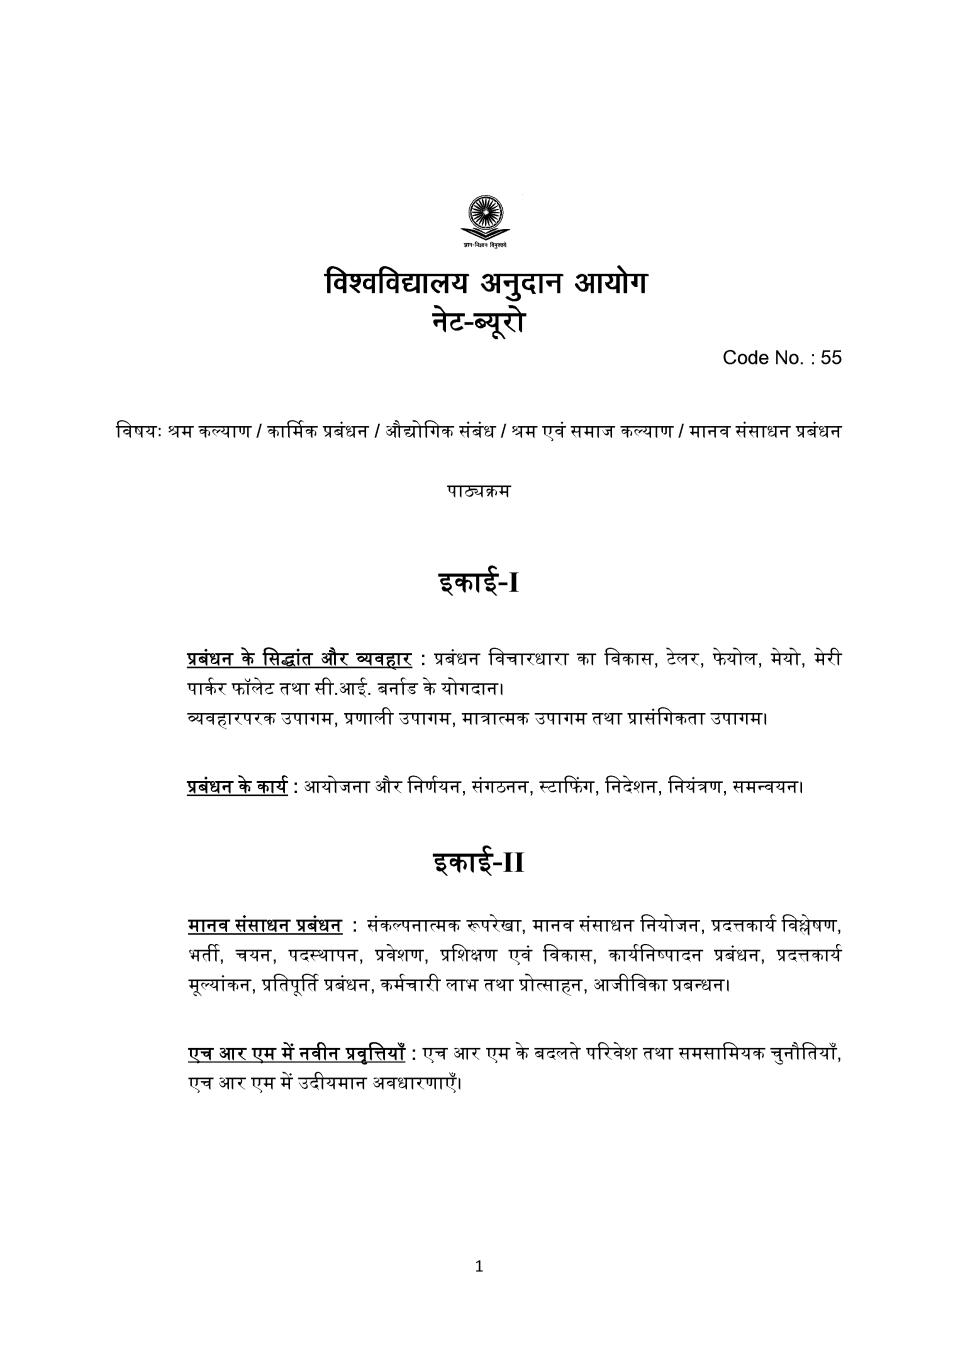 UGC NET Syllabus for Labour Welfare 2020 in hindi - Page 1